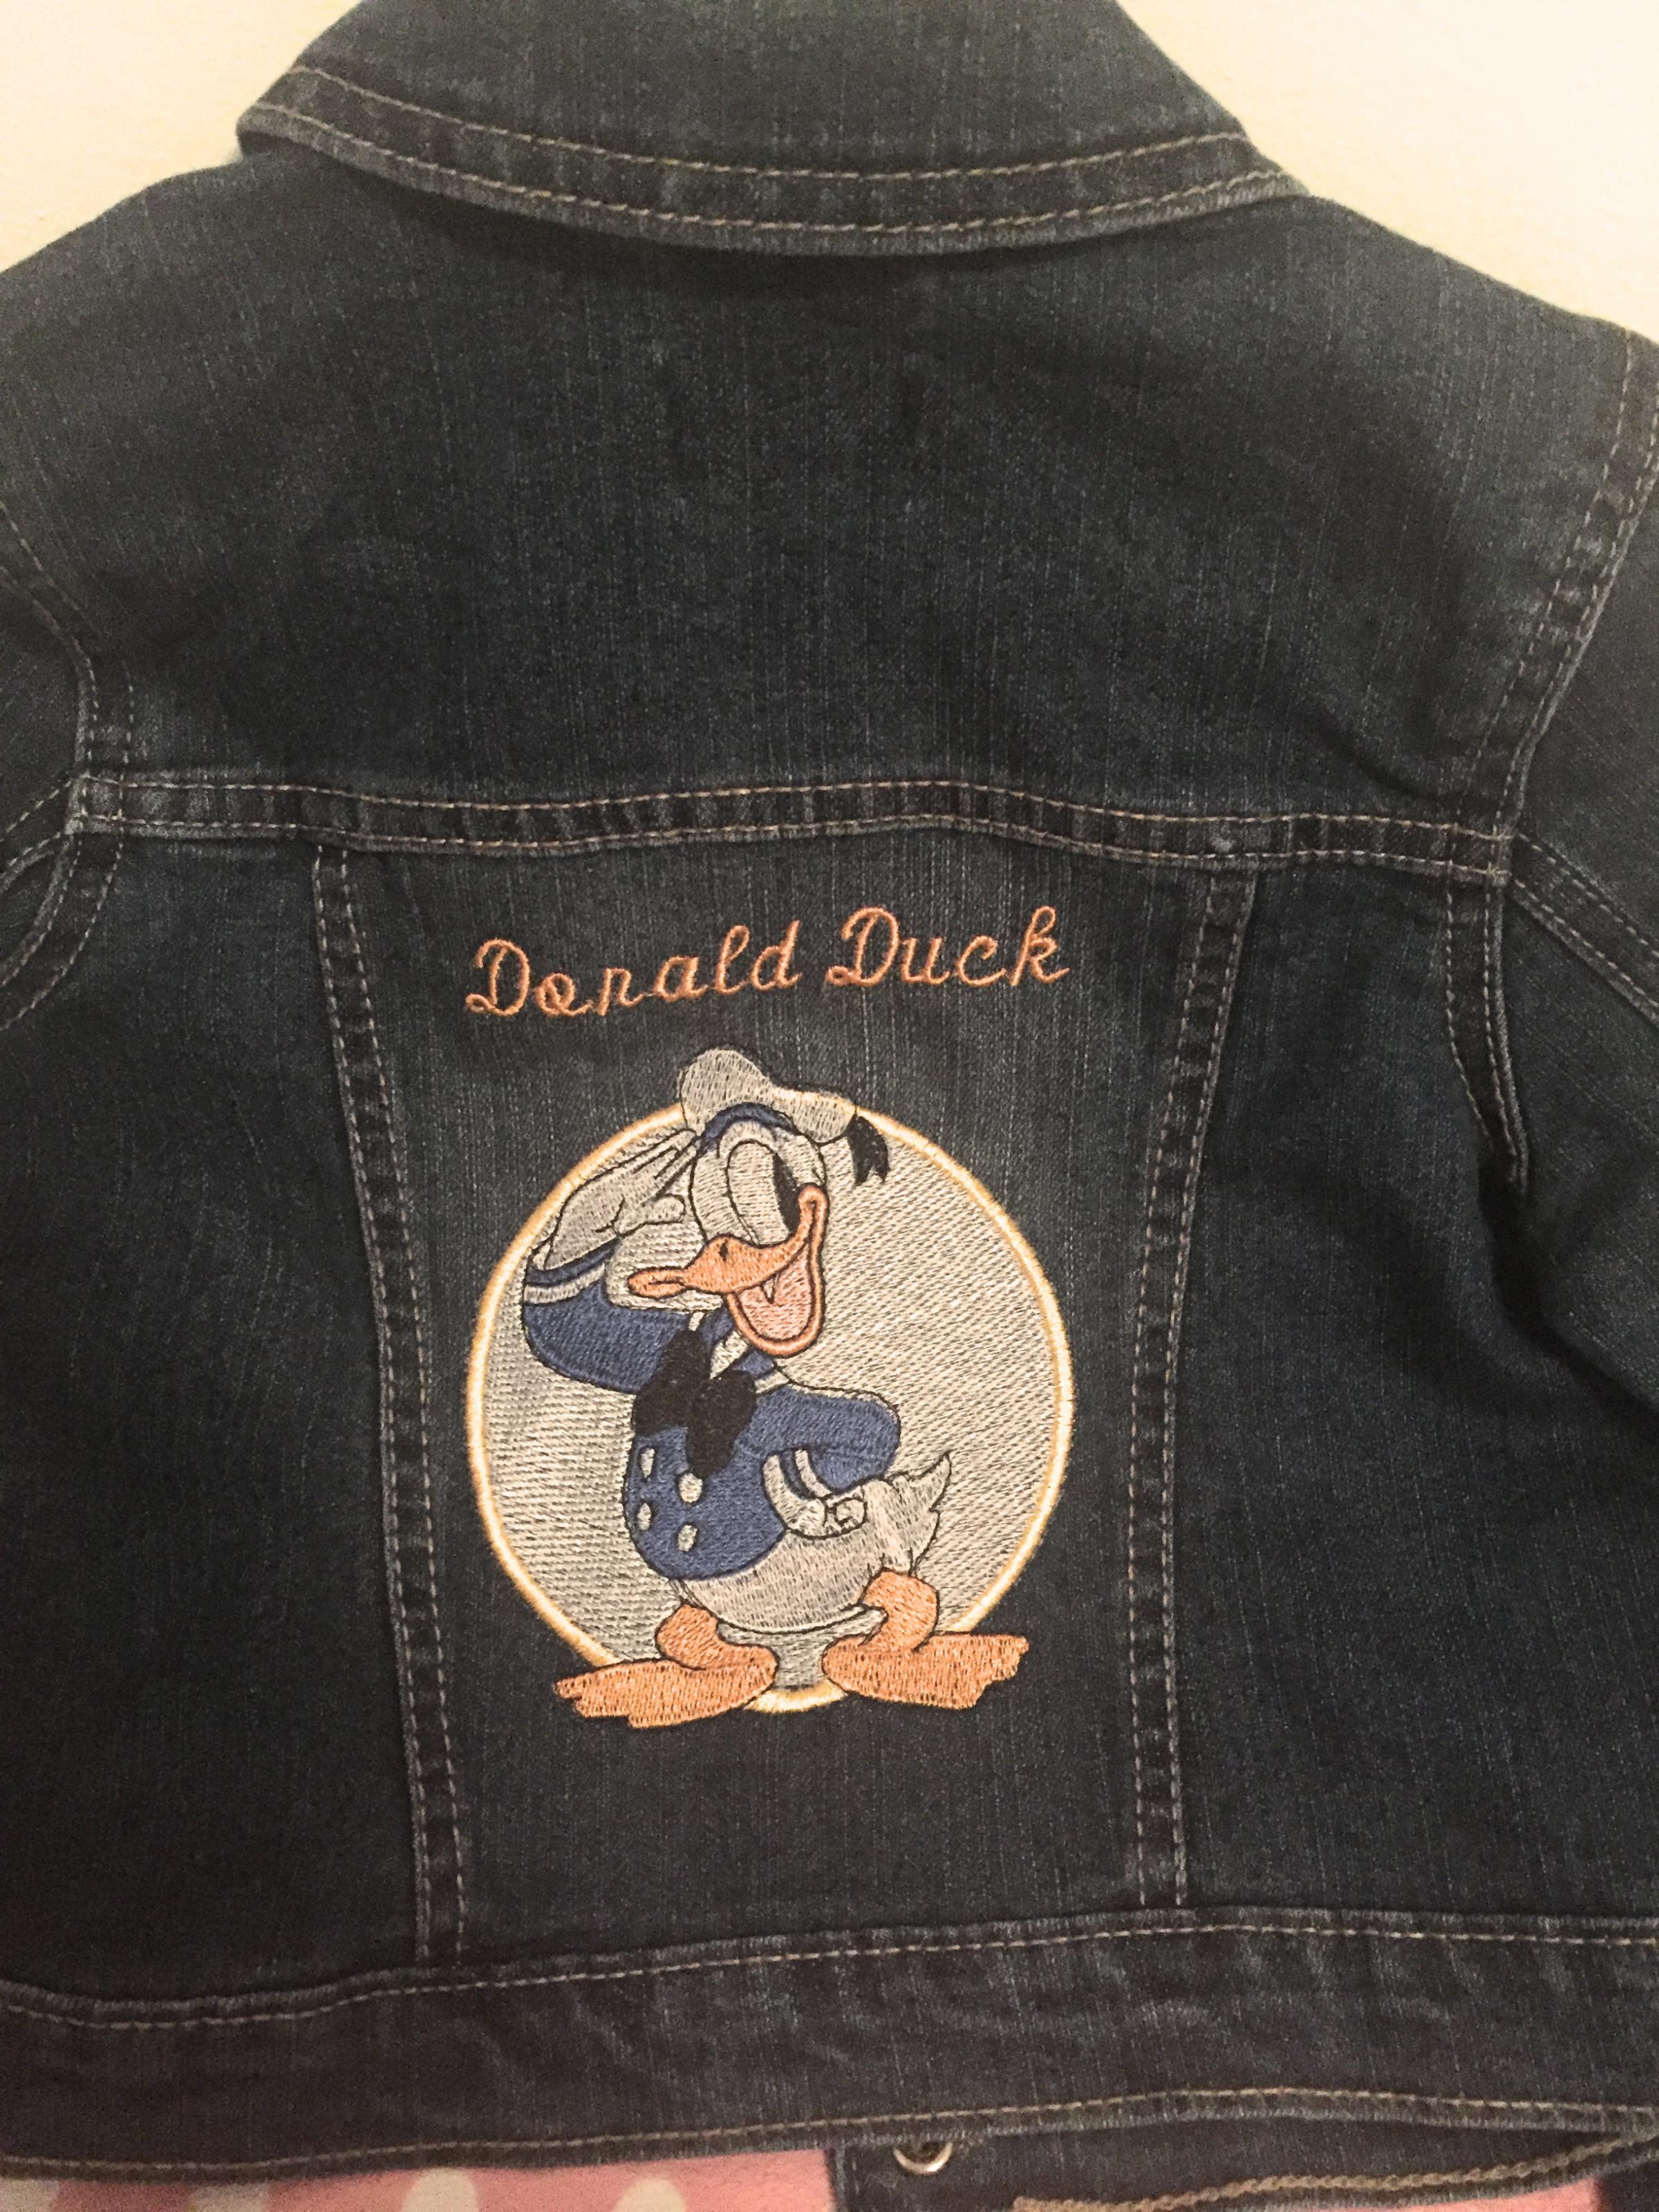 Embroidered jacket with Donald duck design